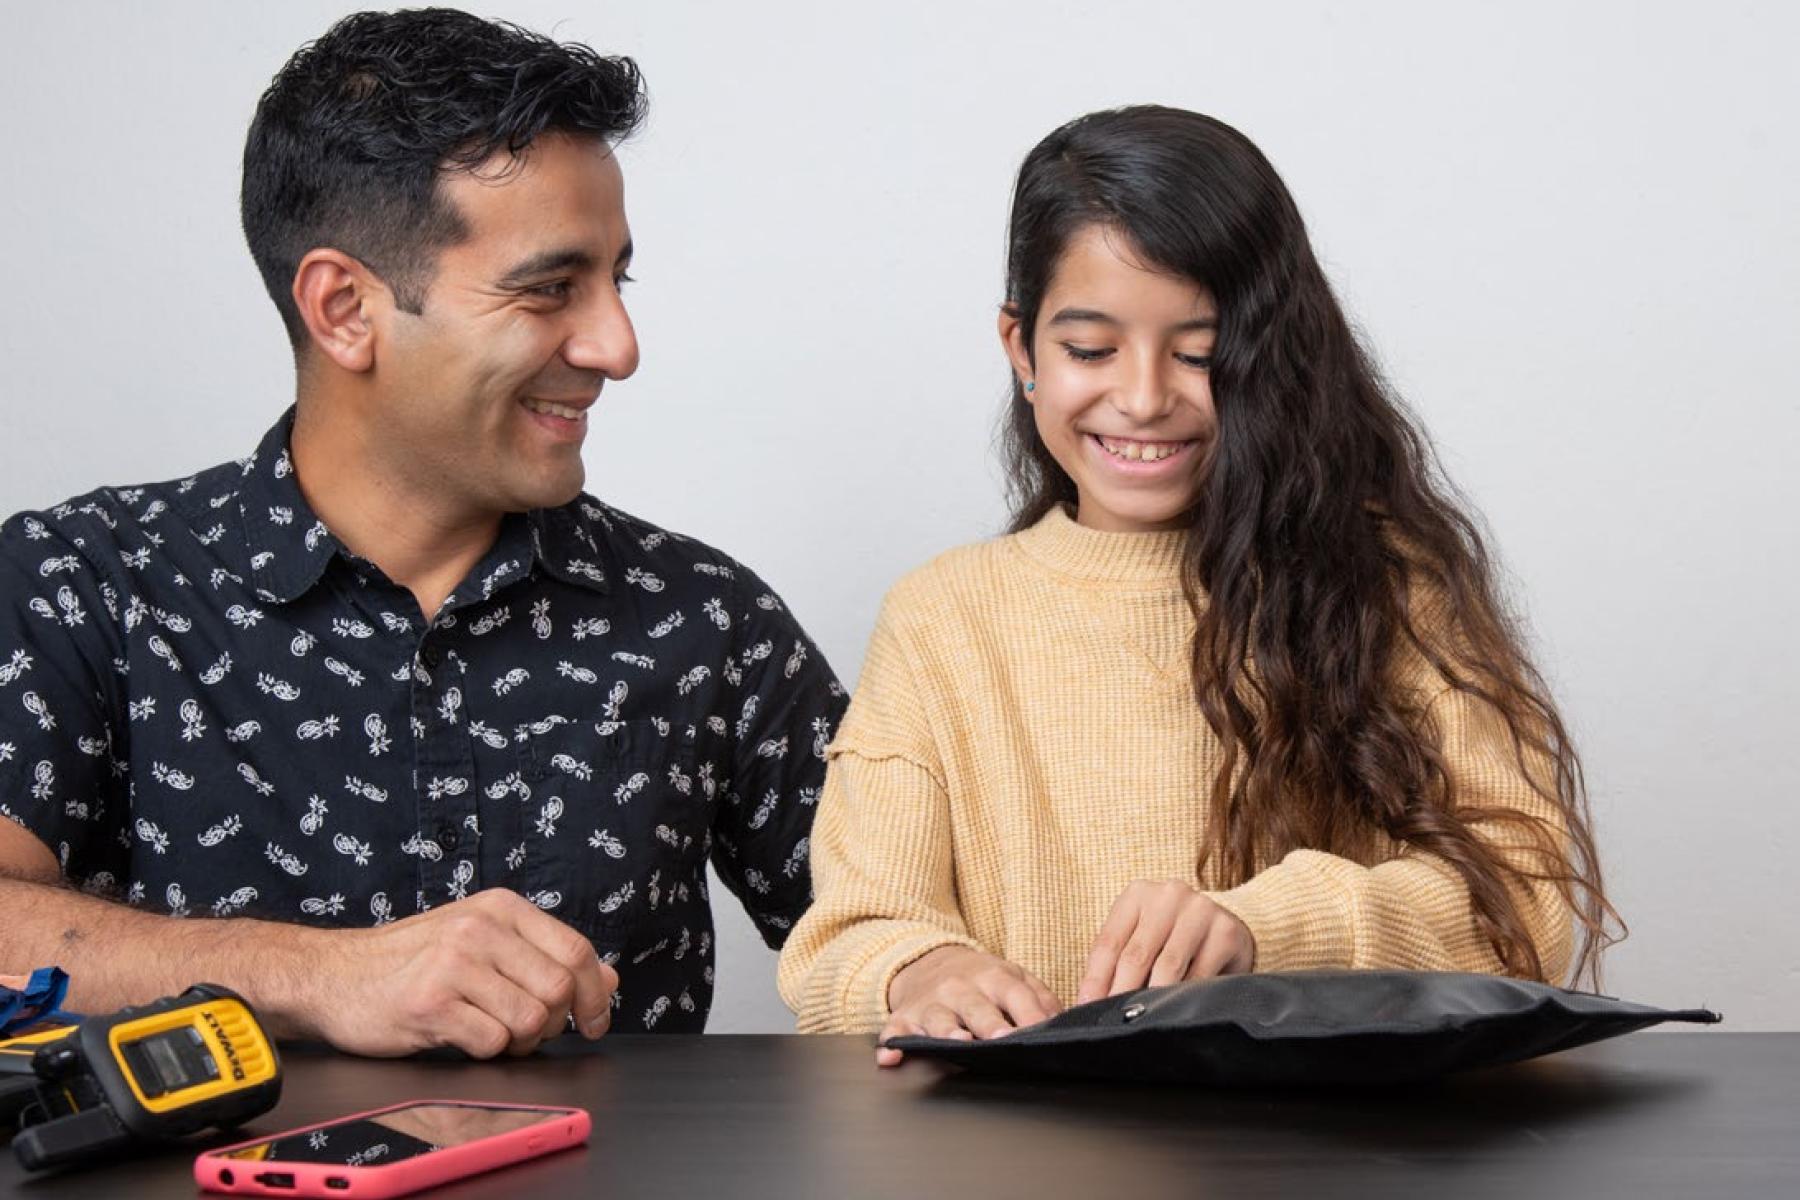 An adult and a child seated at a table both smile as the child wraps a radio device in a black bag called a Faraday bag. A walkie-talkie and a touch-screen mobile phone sit beside the bag.